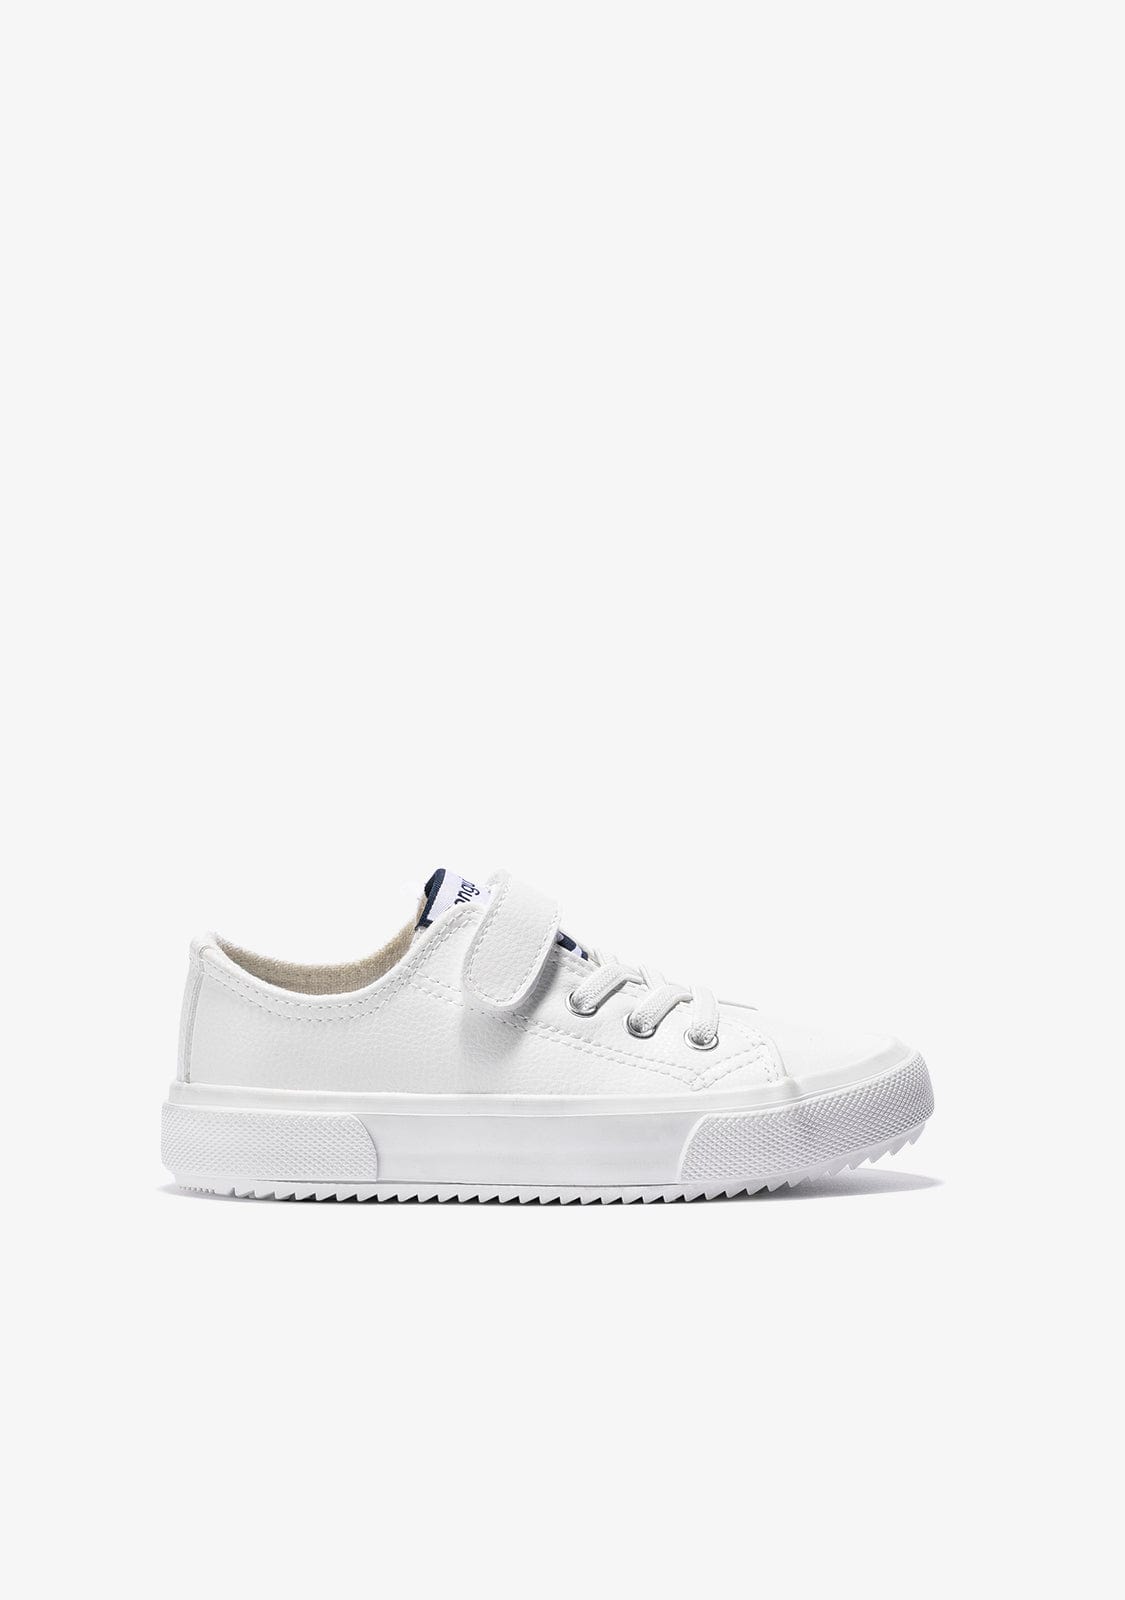 CONGUITOS Shoes Unisex White Adherent Strip Sneakers Micronapa